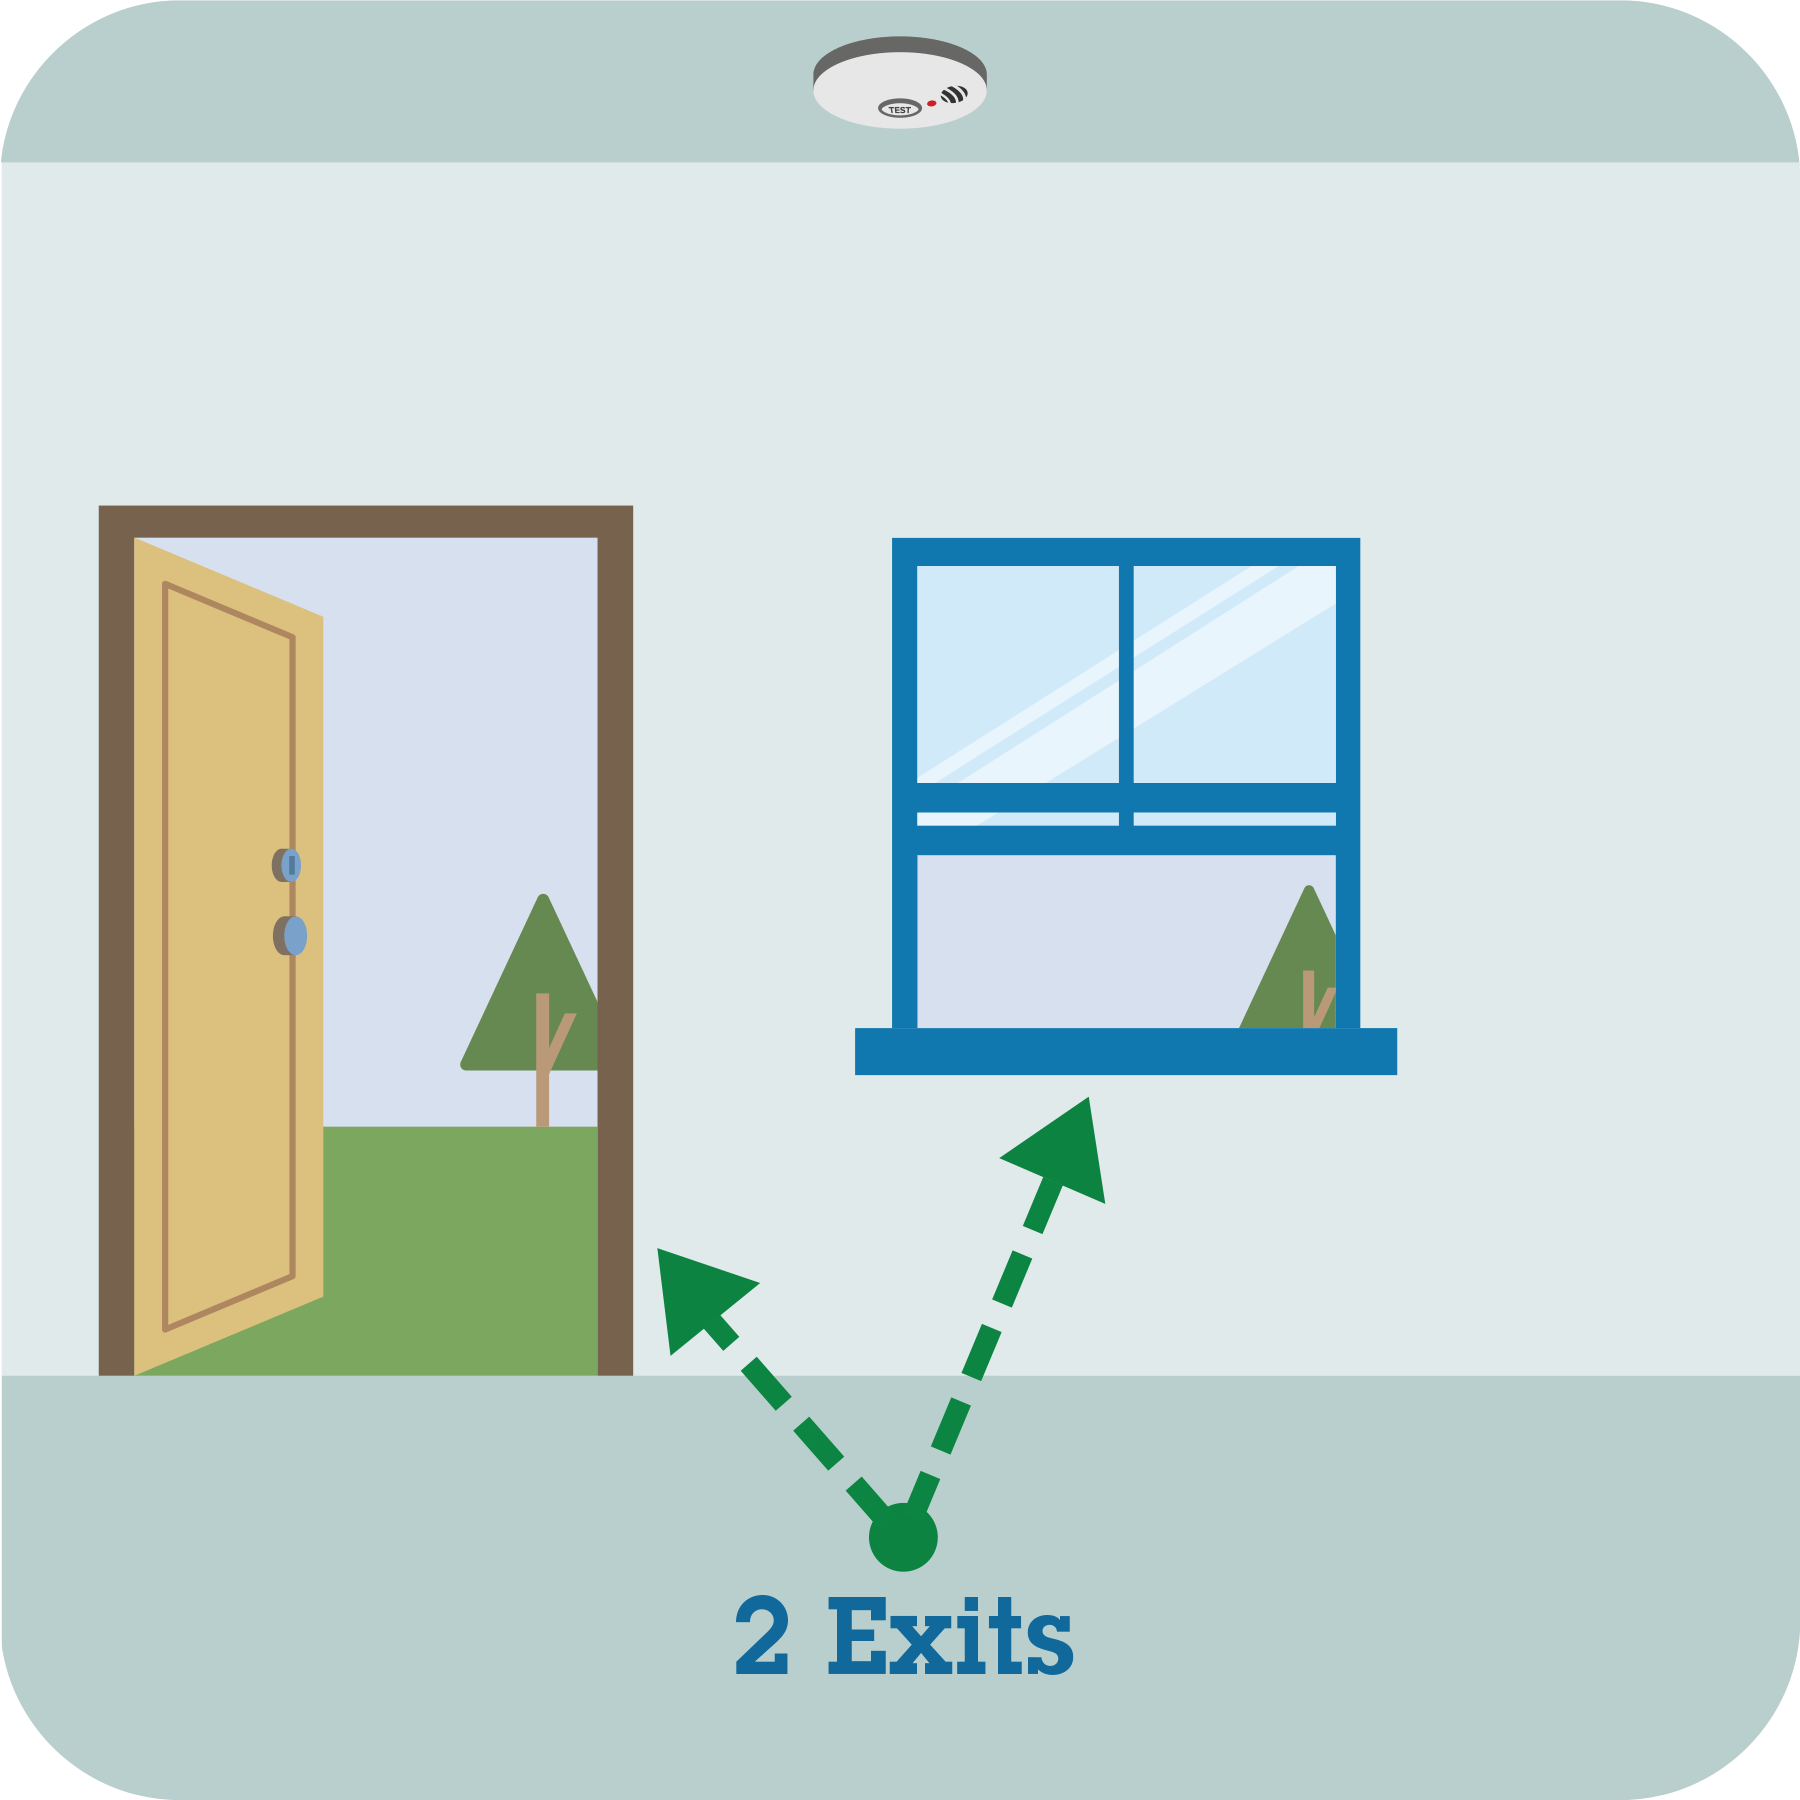 A room with two exits (window and door).